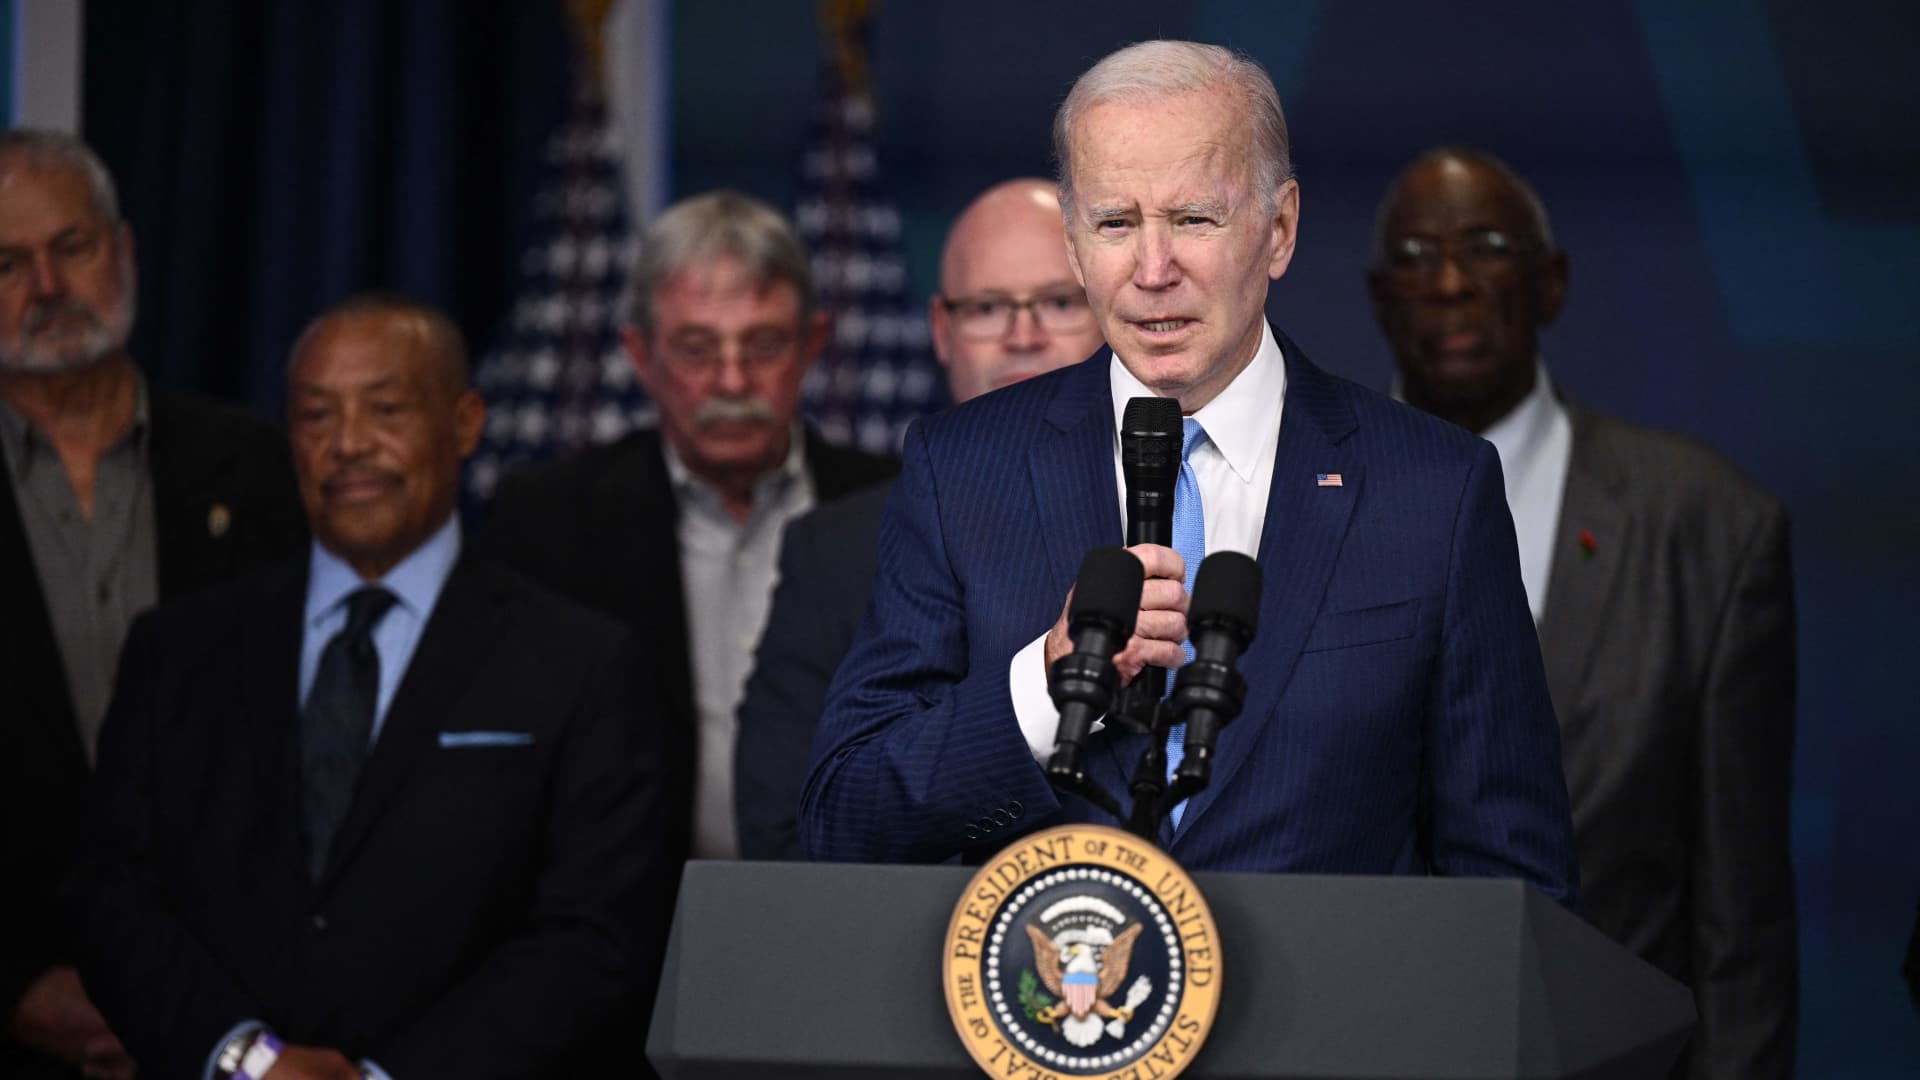 Majority of Americans don’t want Biden or Trump to run again in 2024, CNBC survey shows